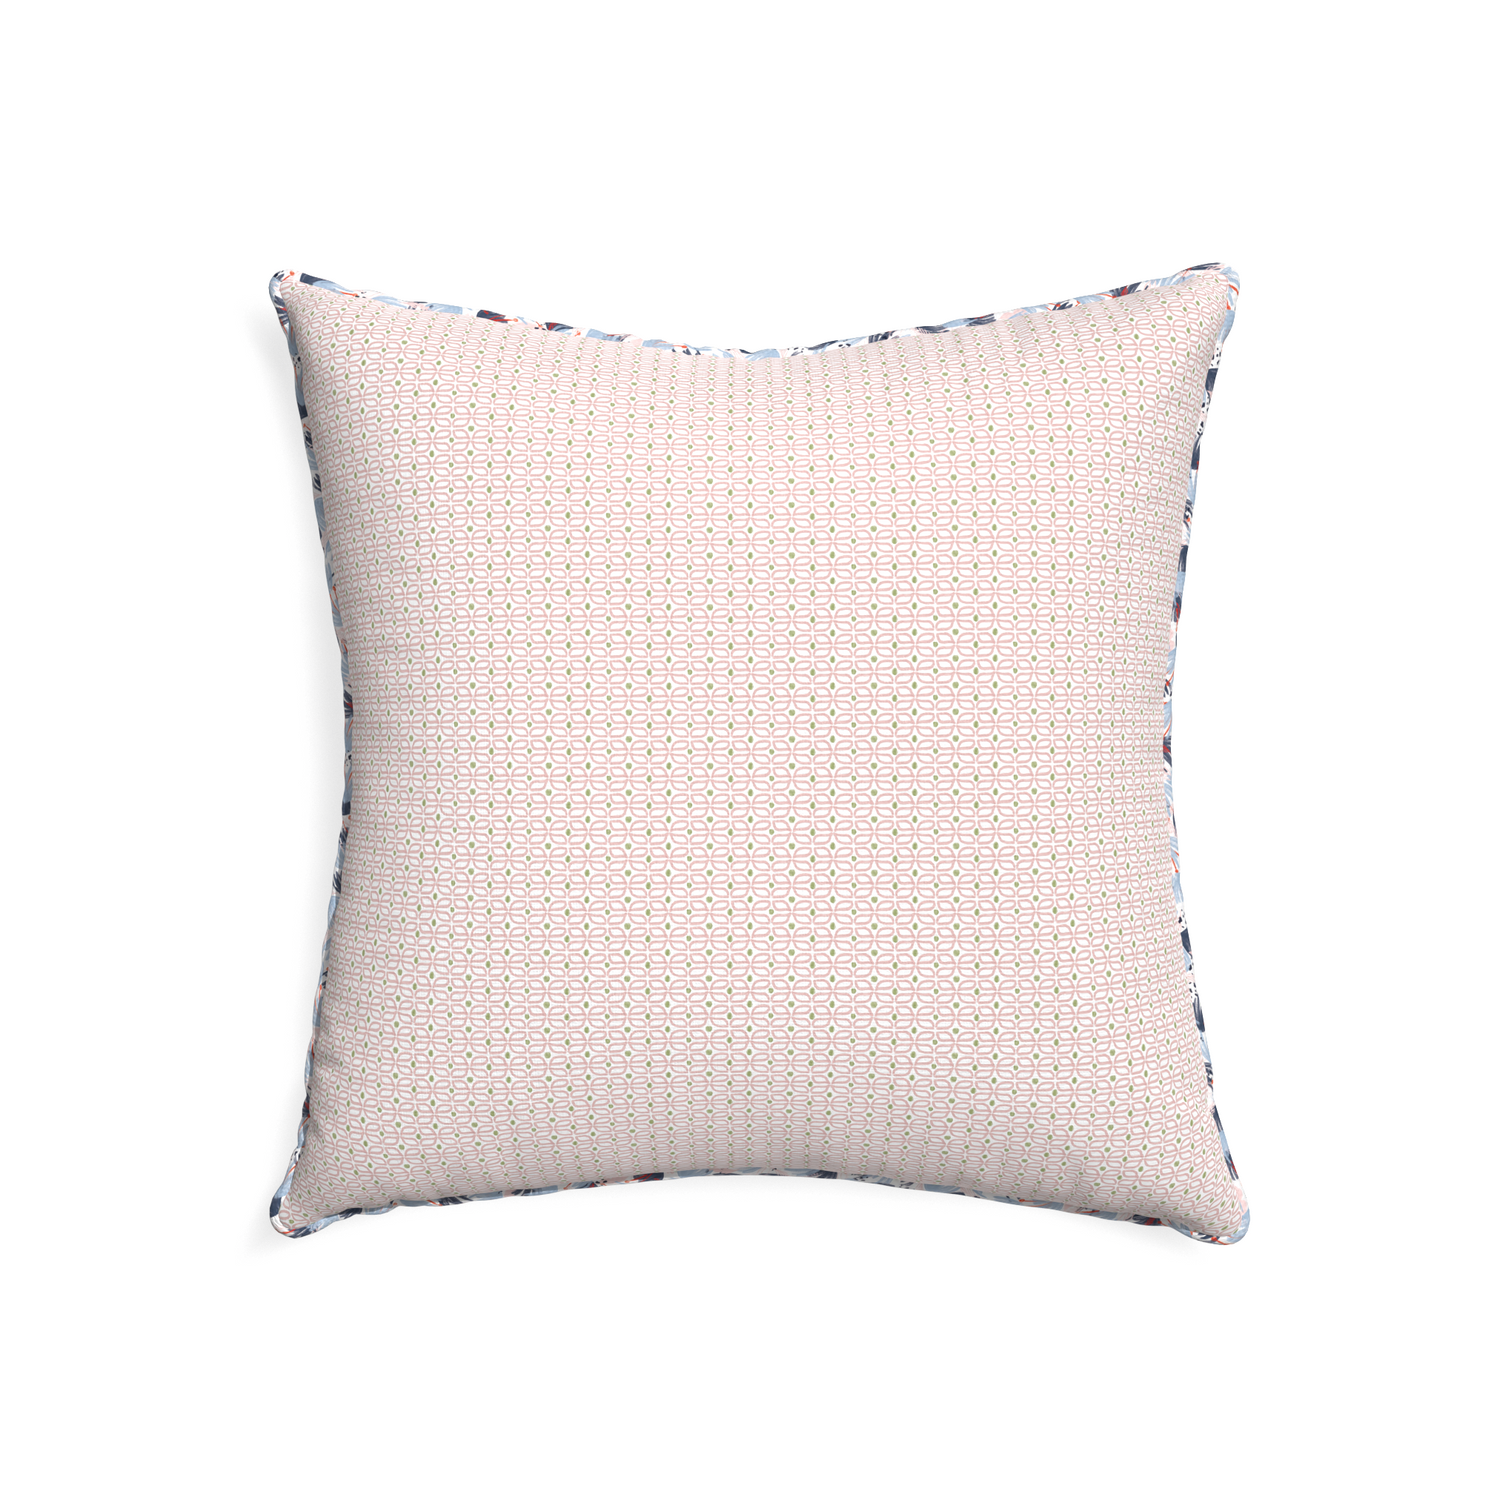 22-square loomi pink custom pillow with e piping on white background